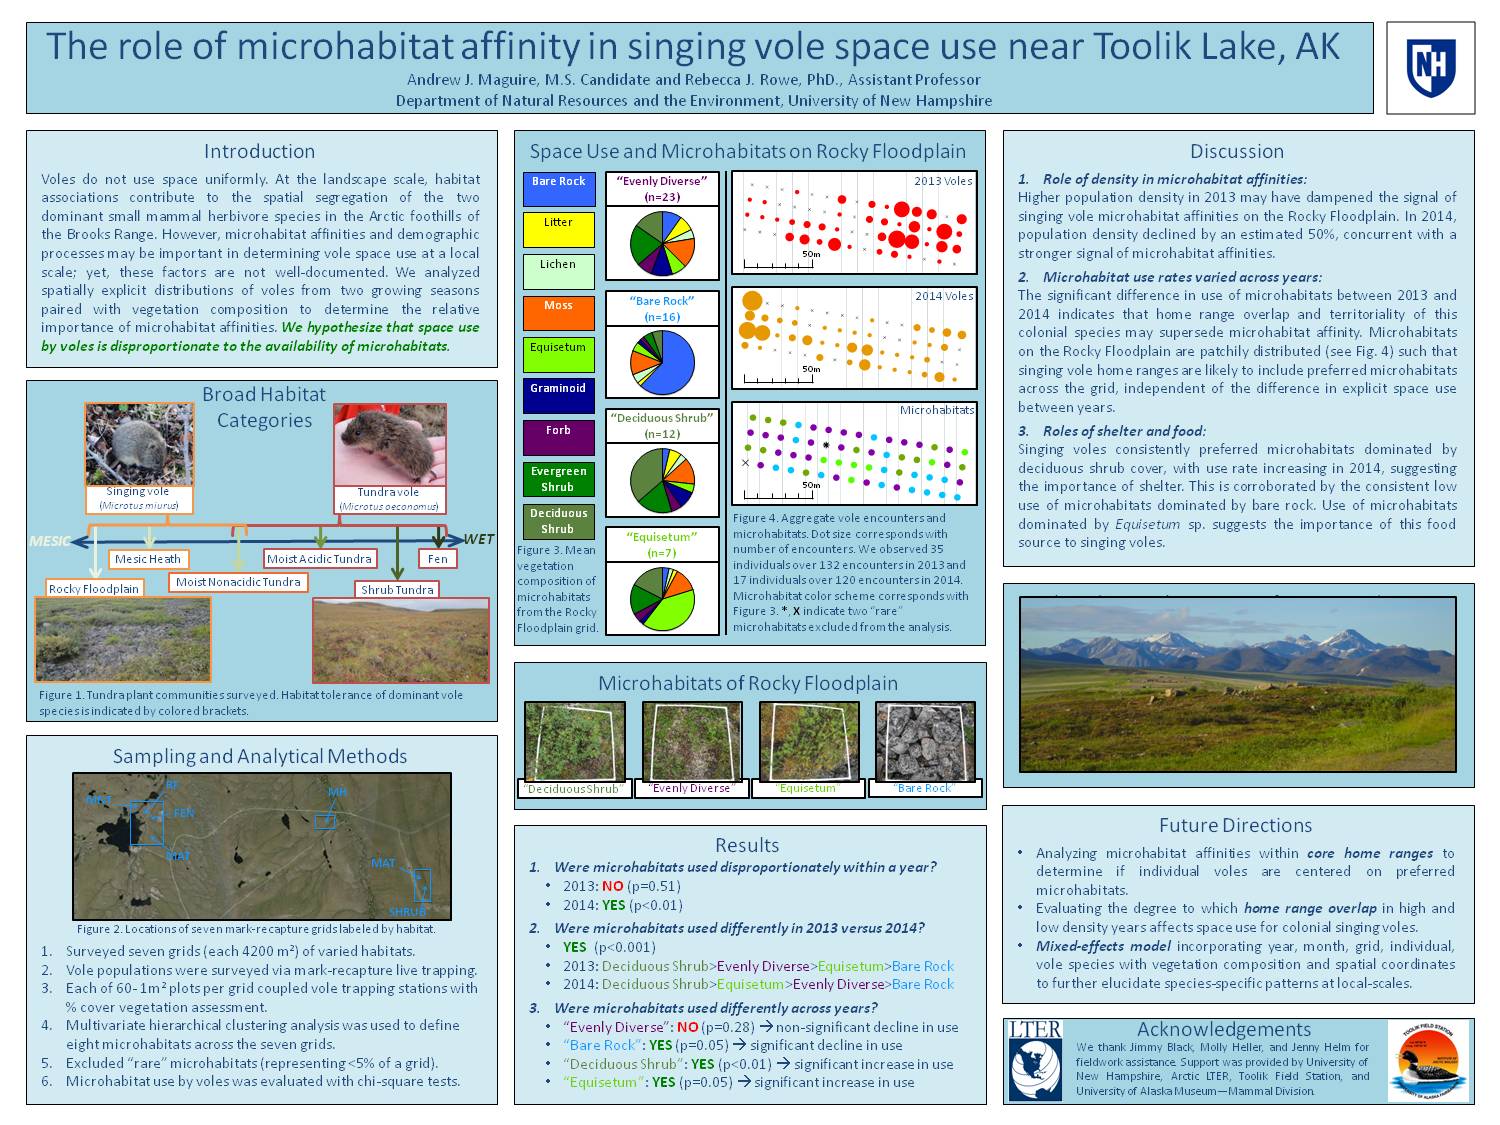 The Role Of Microhabitat Affinity In Singing Vole Space Use Near Toolik Lake, Ak by aja68